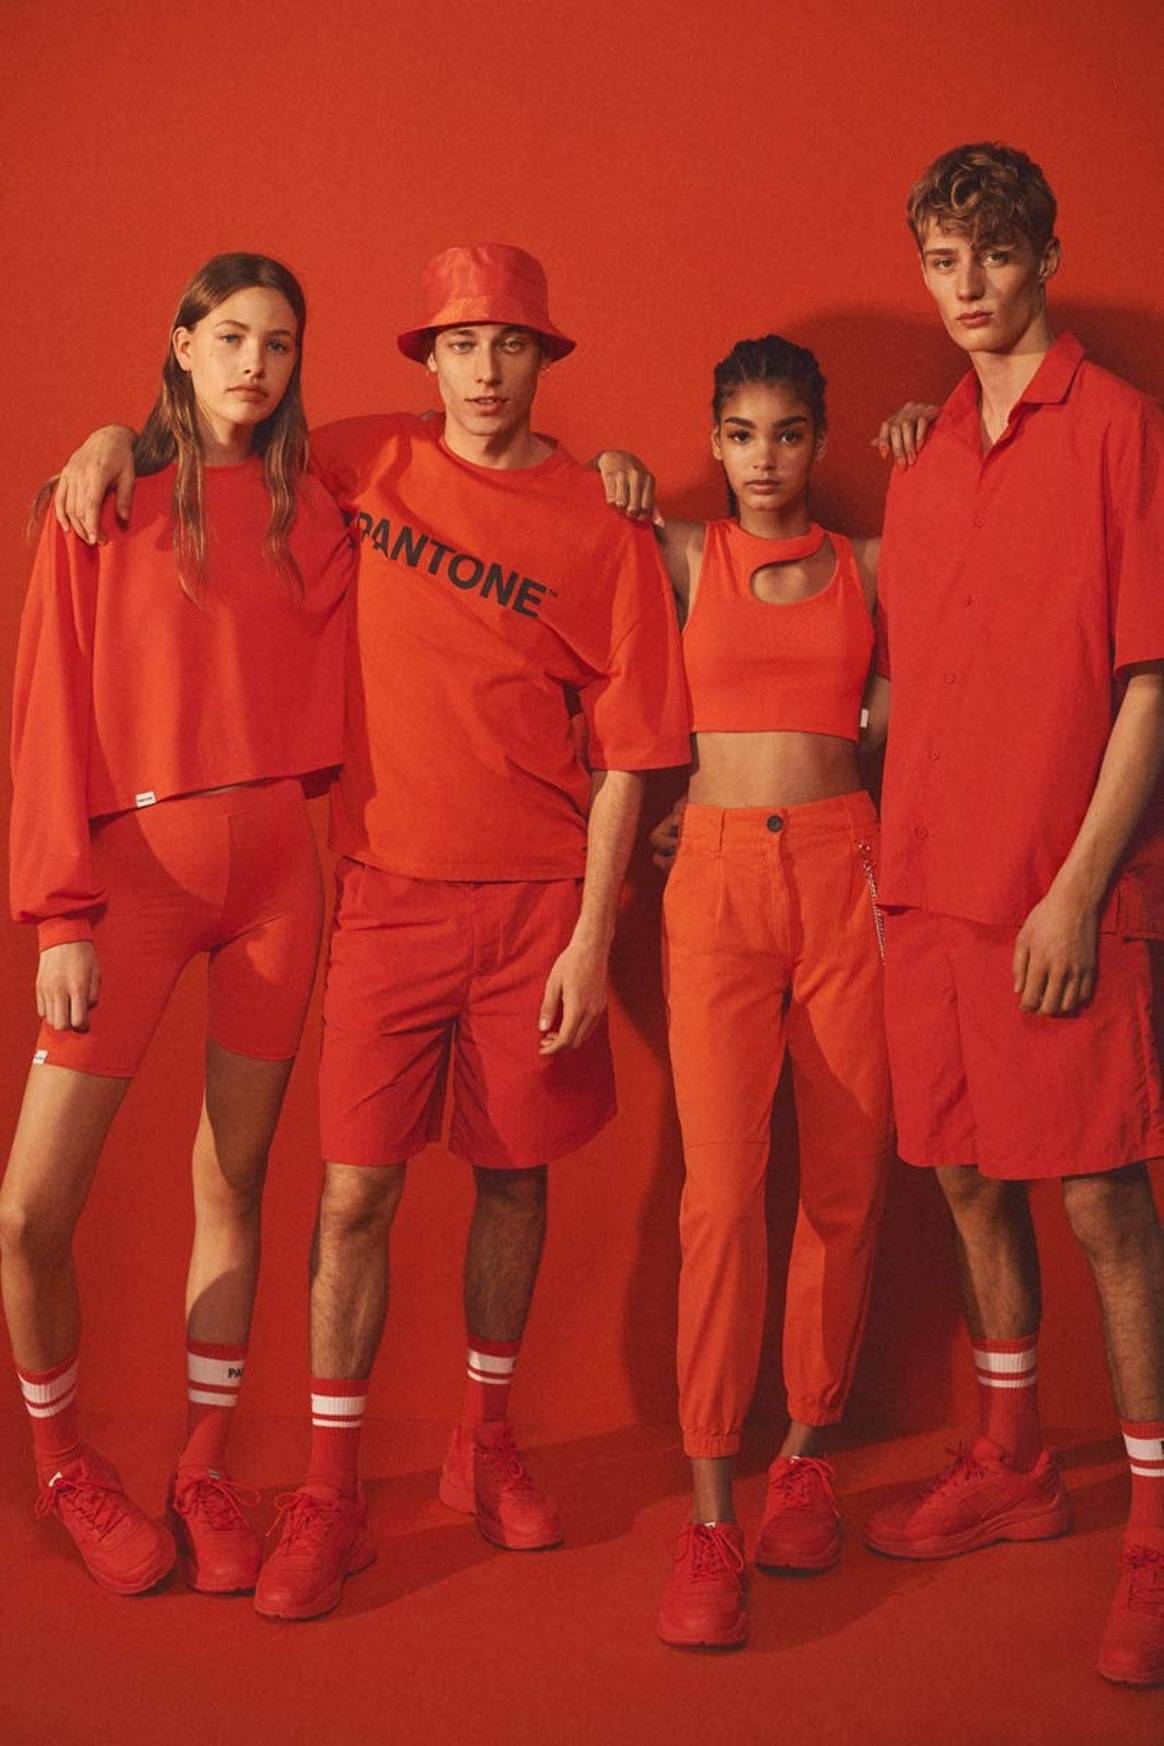 In pictures: Bershka teams up with Pantone for monochromatic capsule collection